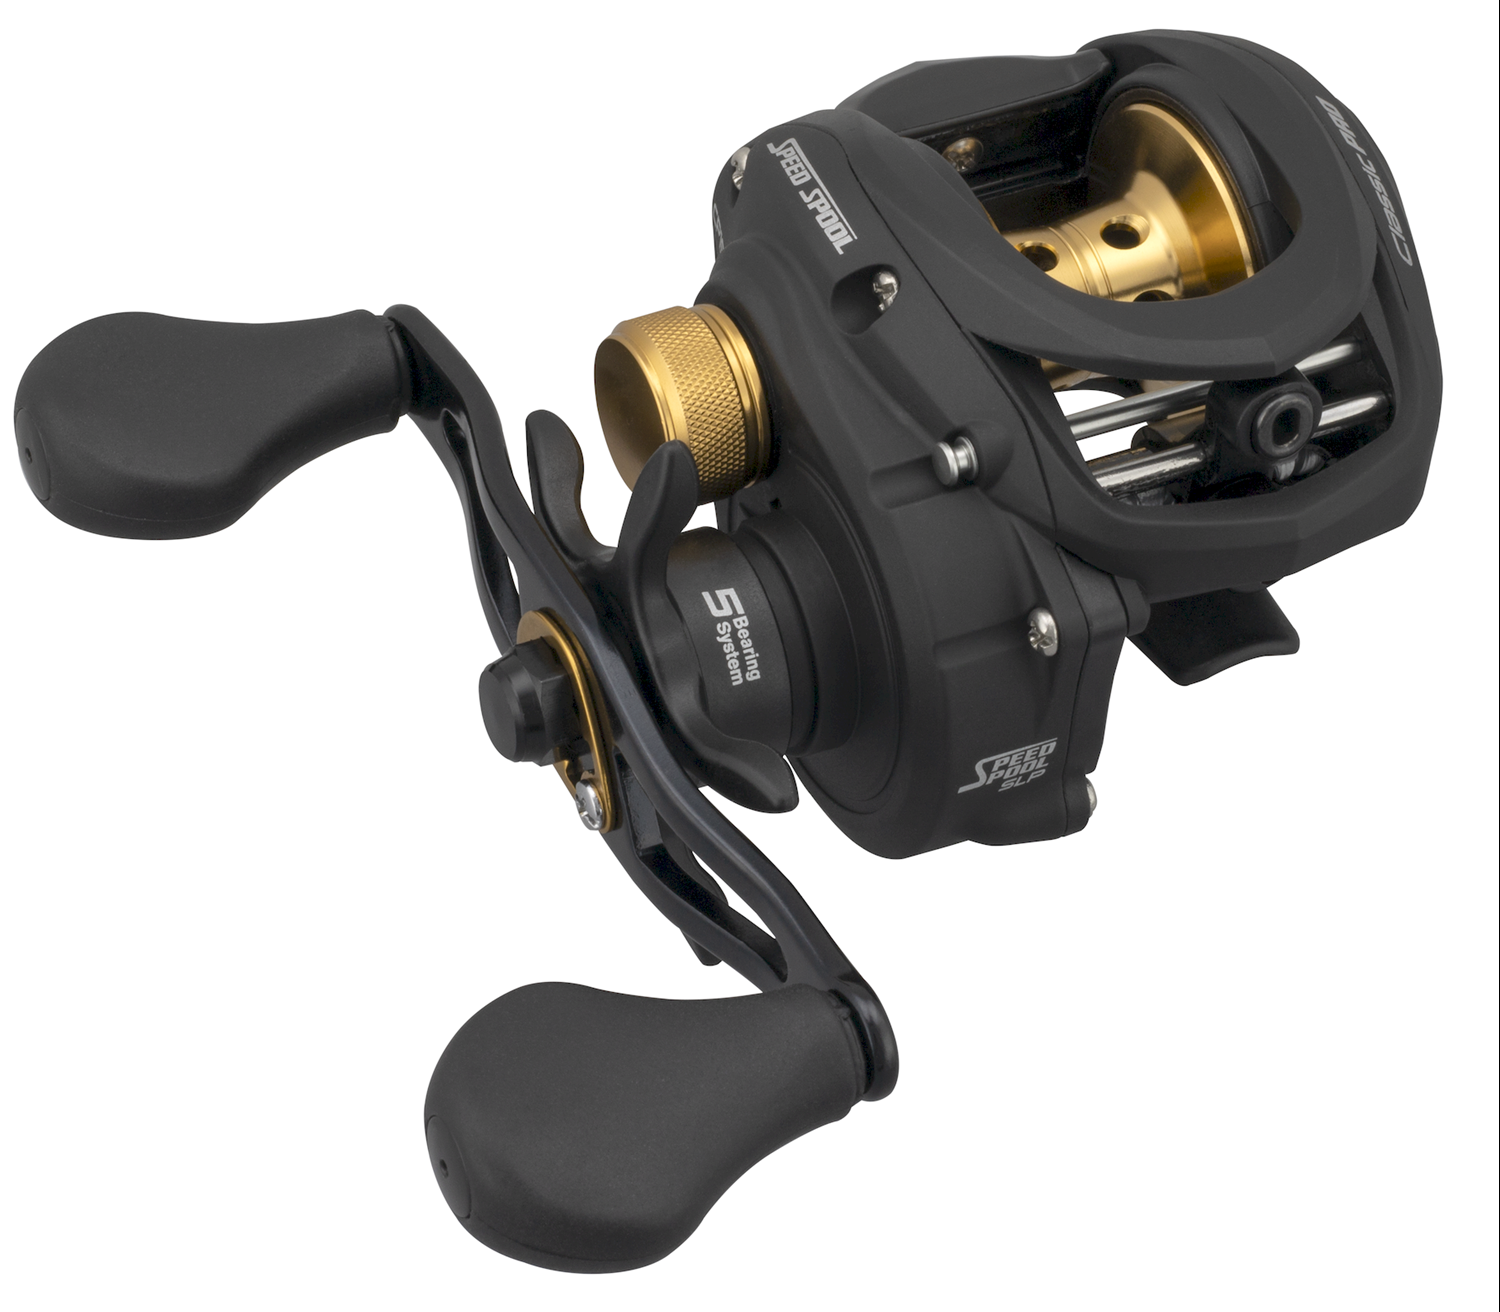 Lew's Classic Pro Baitcast Reel , Up to $5.20 Off with Free S&H — CampSaver